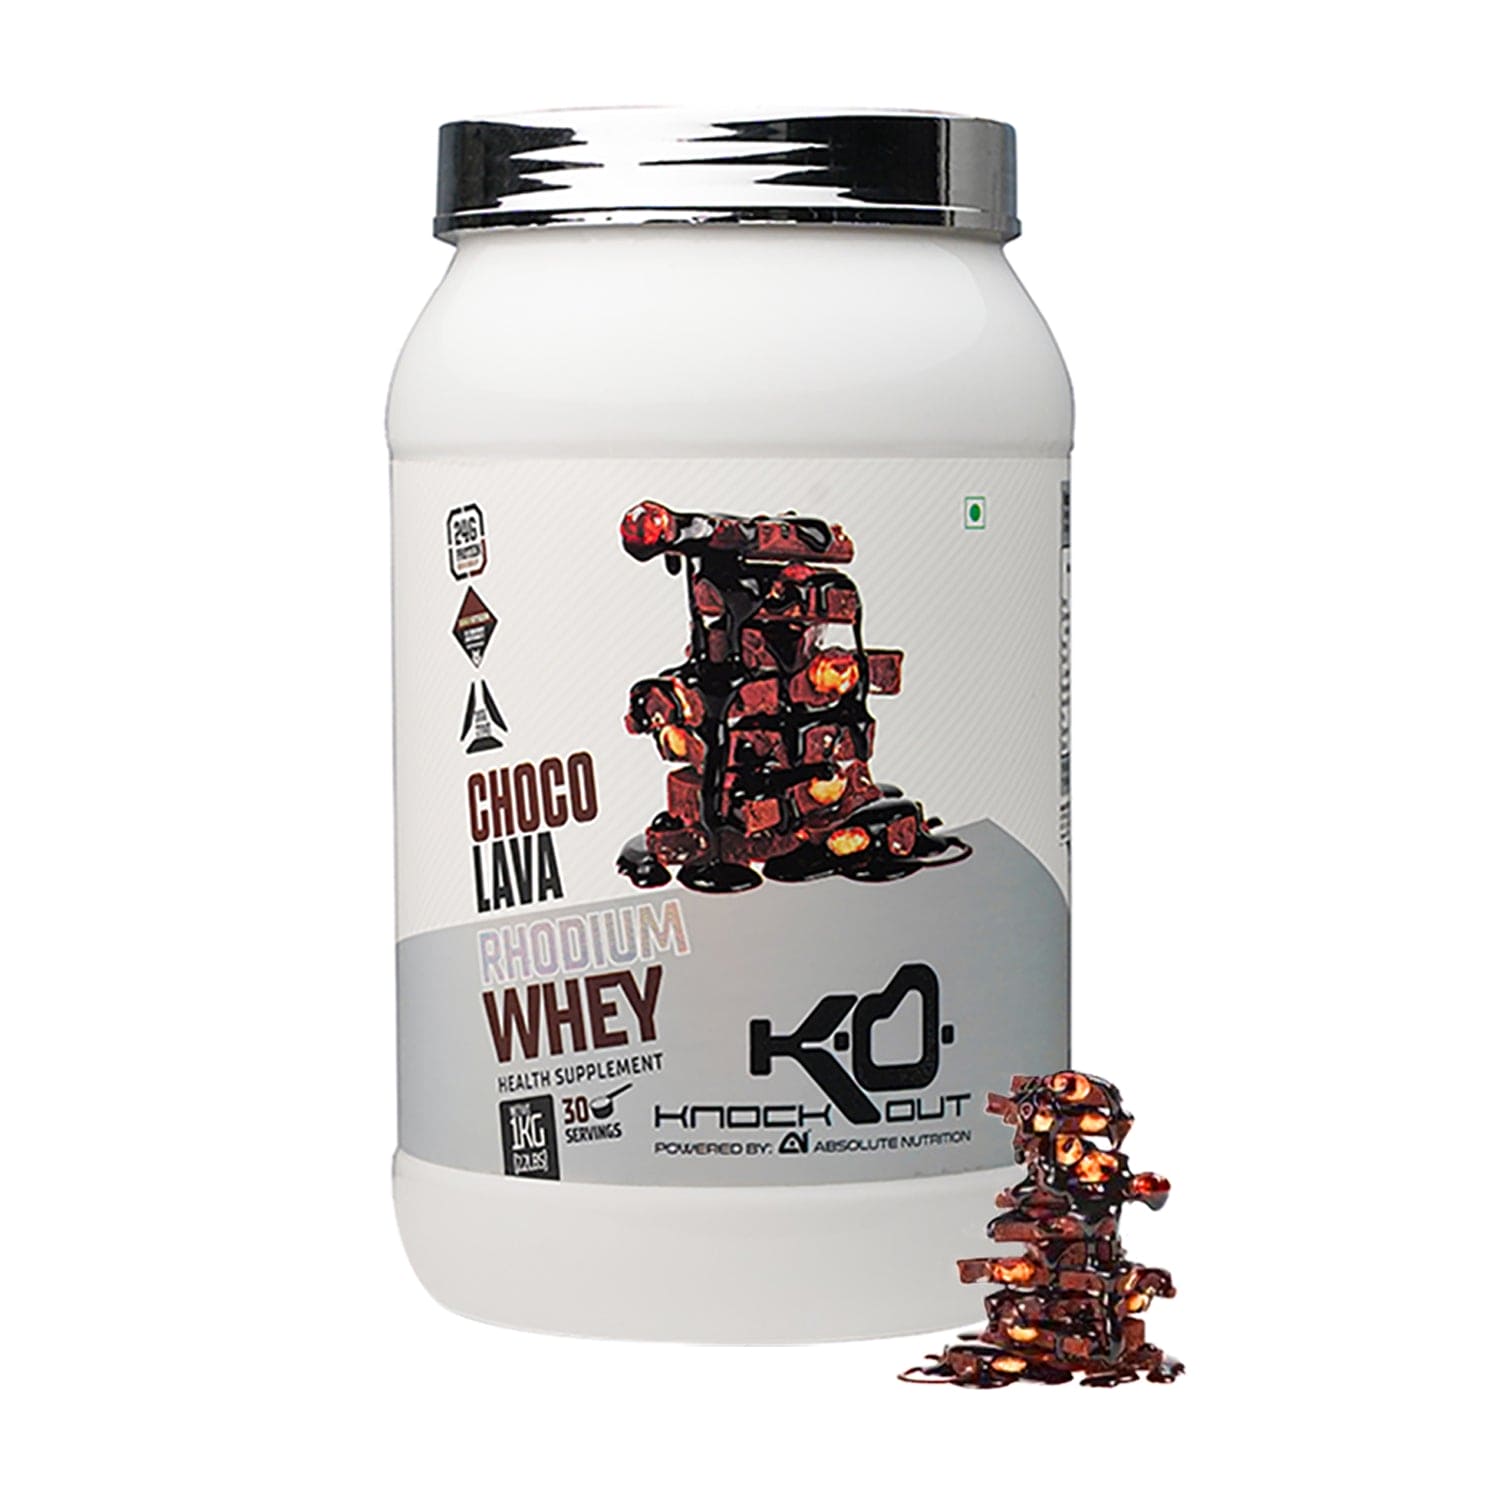 best whey protein blend for muscle growth, best whey protein for muscle gain, best whey blend protein powder, best whey protein blend, Rhodium whey protein blend by knockout by absolute nutrition, best indian whey blend protein , Rhodium whey protein with free shaker, best protein powder by knockout by absolute nutrition